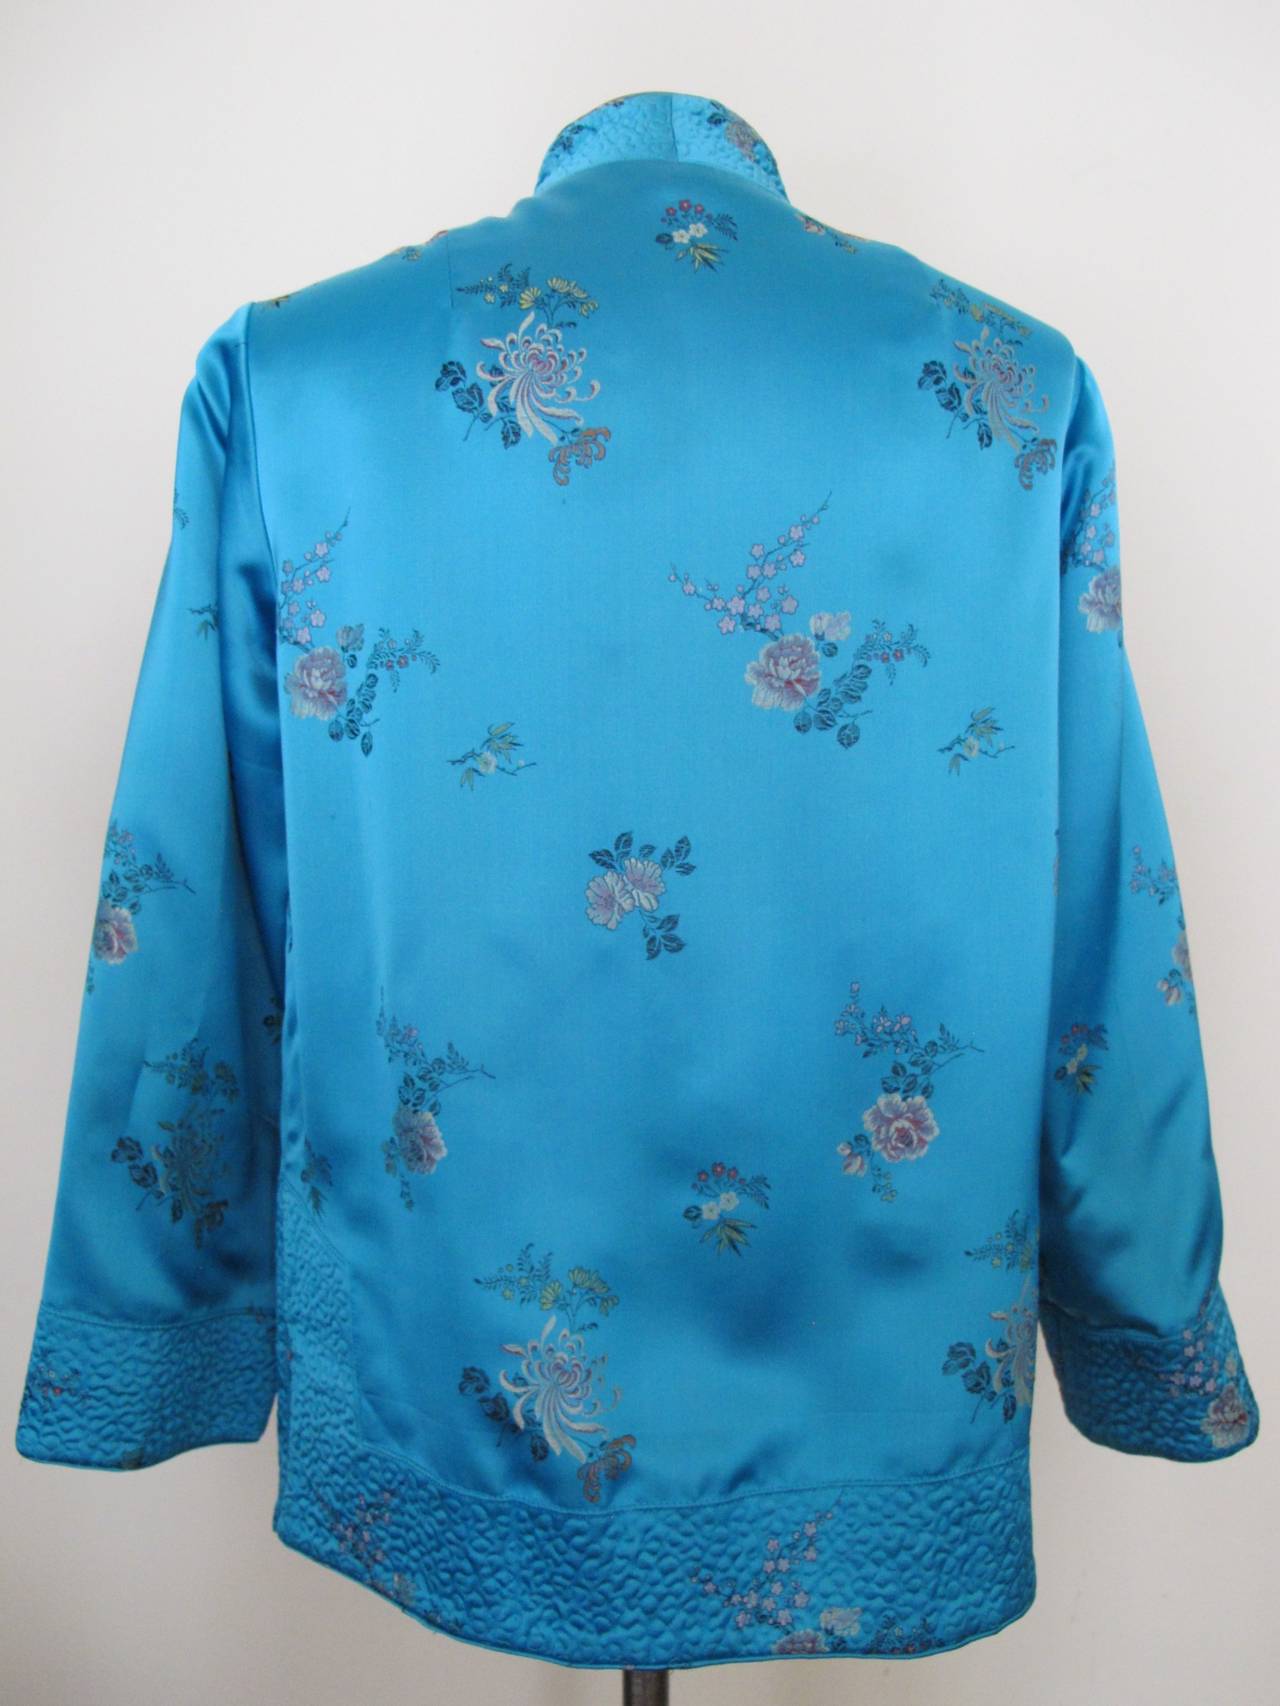 Blue 1970's Turquoise Reversible Chinese Jacket with Floral Design